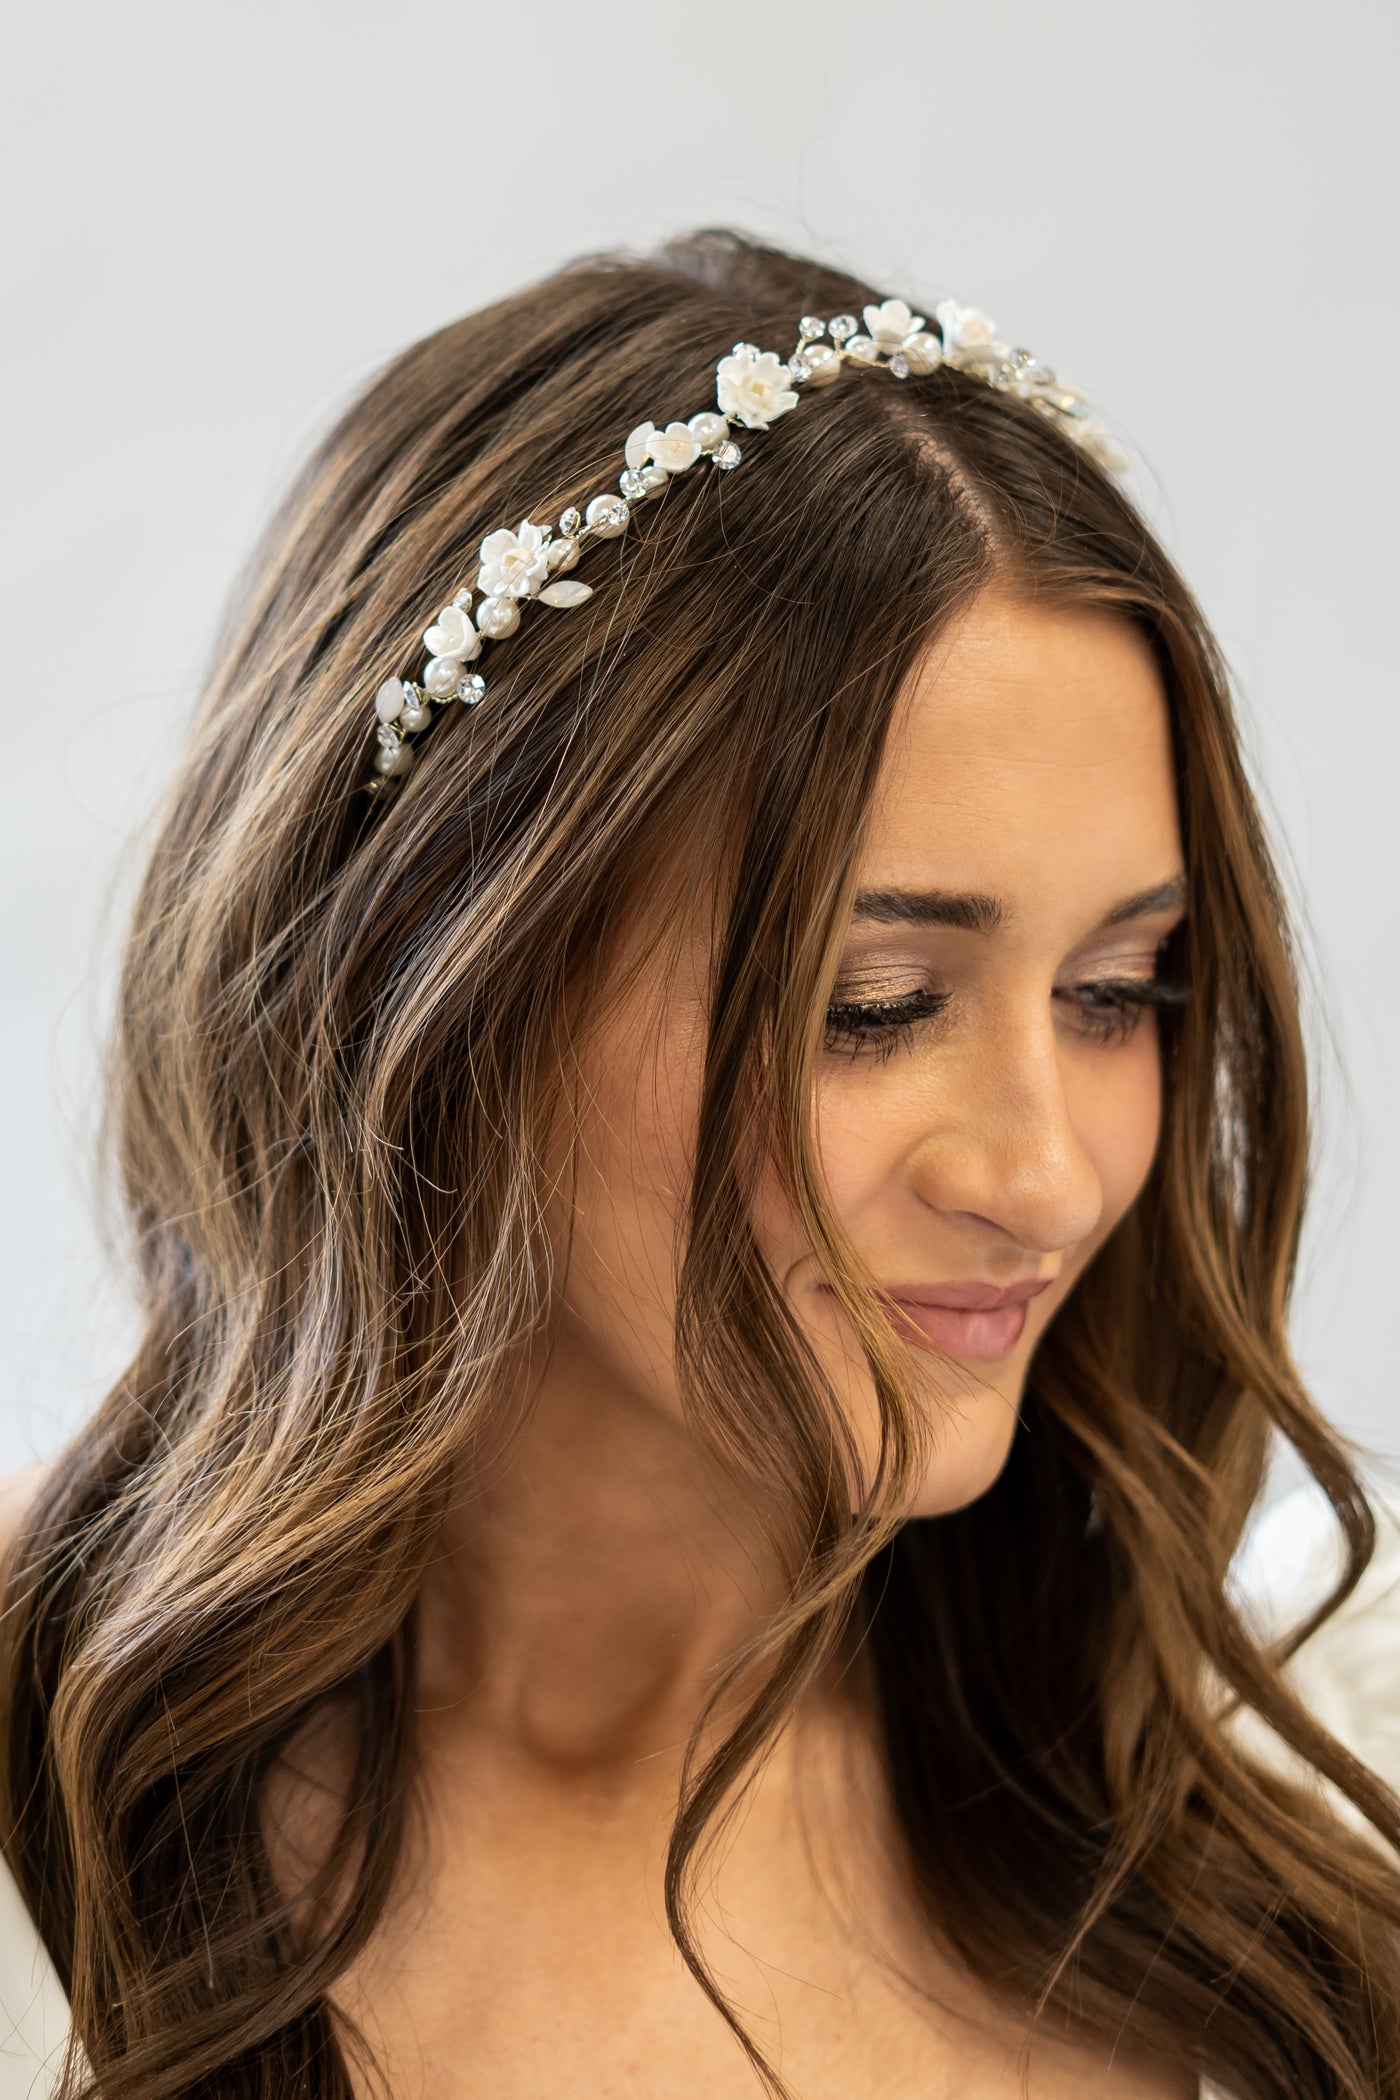 A headpiece with pearl, crystal, and floral accents to perfectly compliments a wedding dress